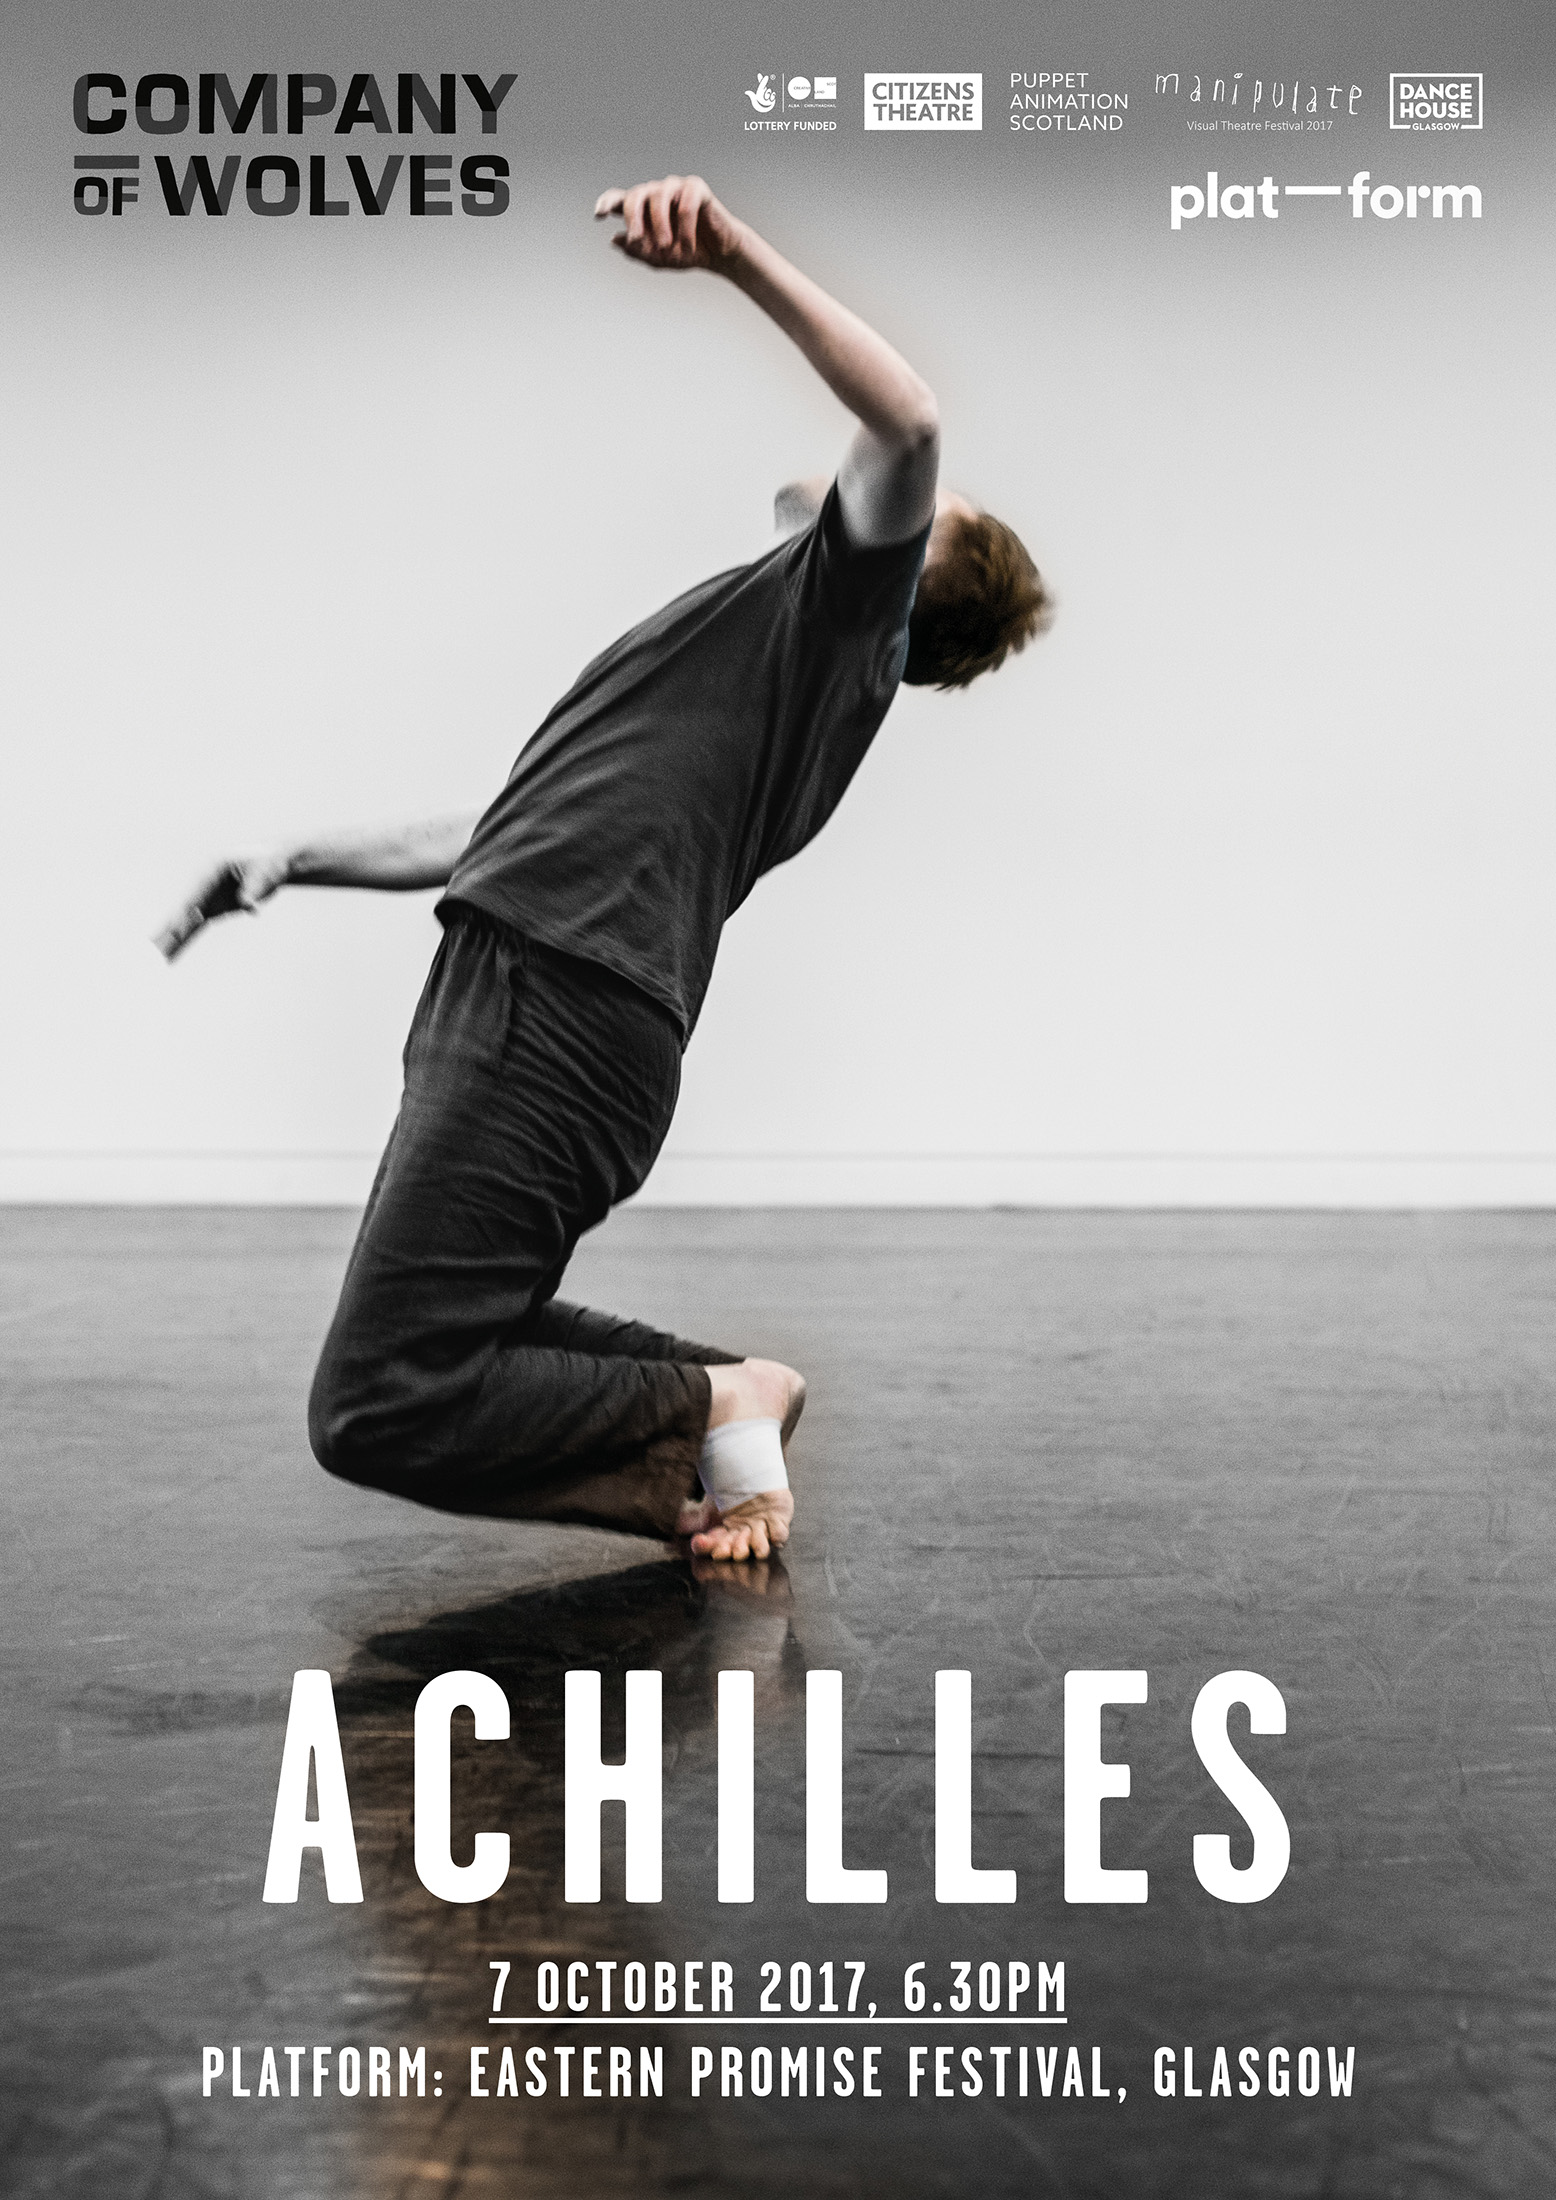 Company of Wolves: Achilles